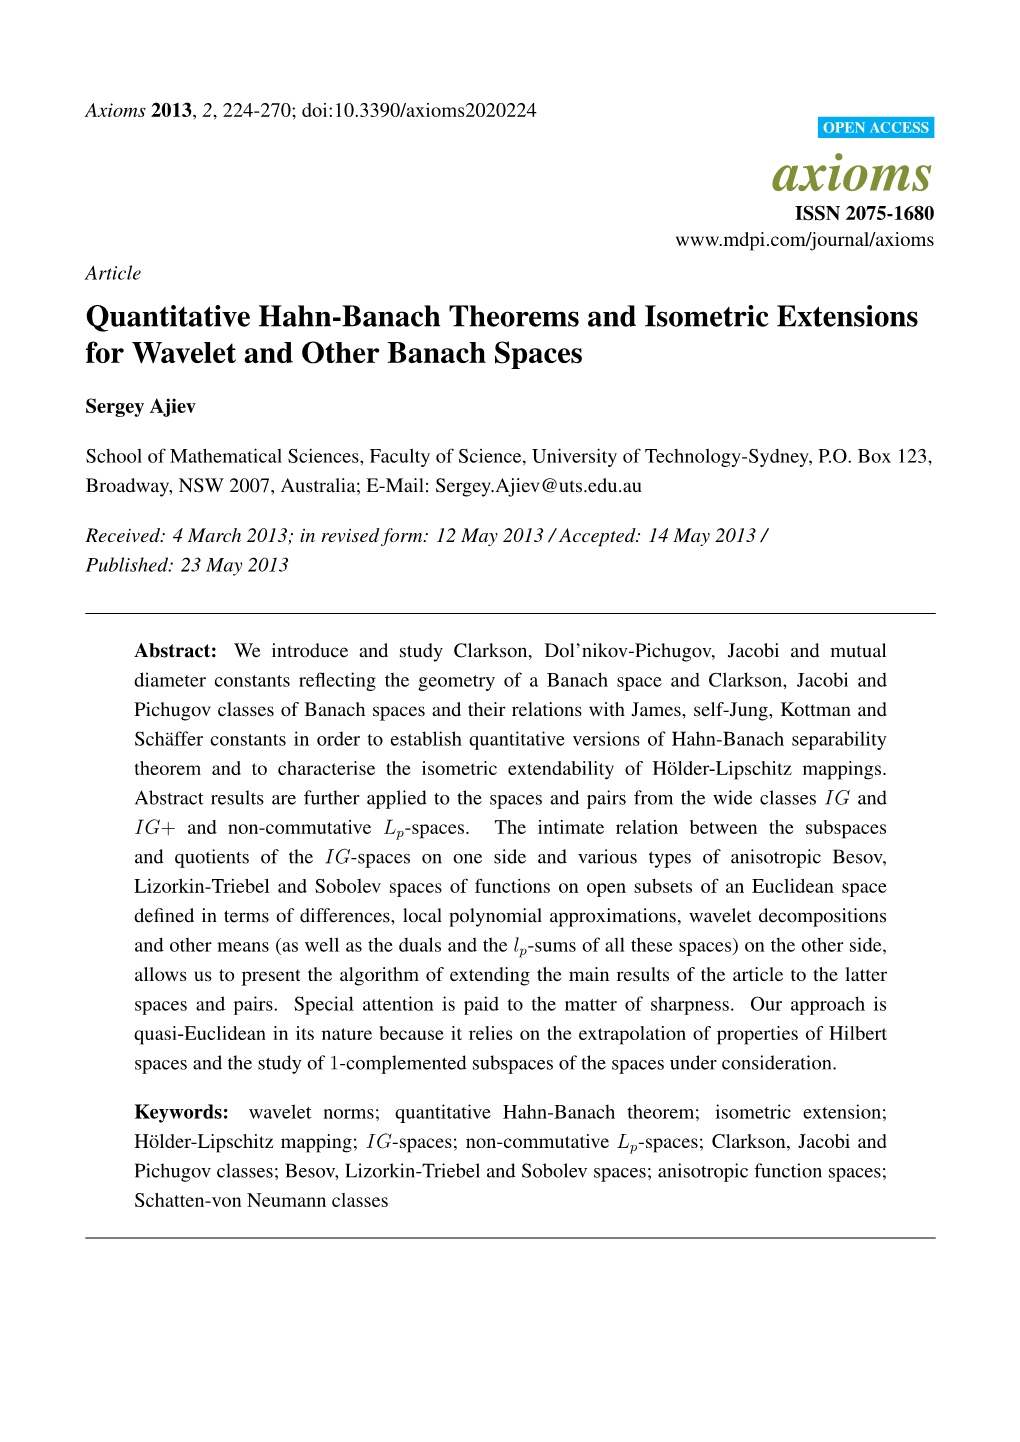 Quantitative Hahn-Banach Theorems and Isometric Extensions for Wavelet and Other Banach Spaces